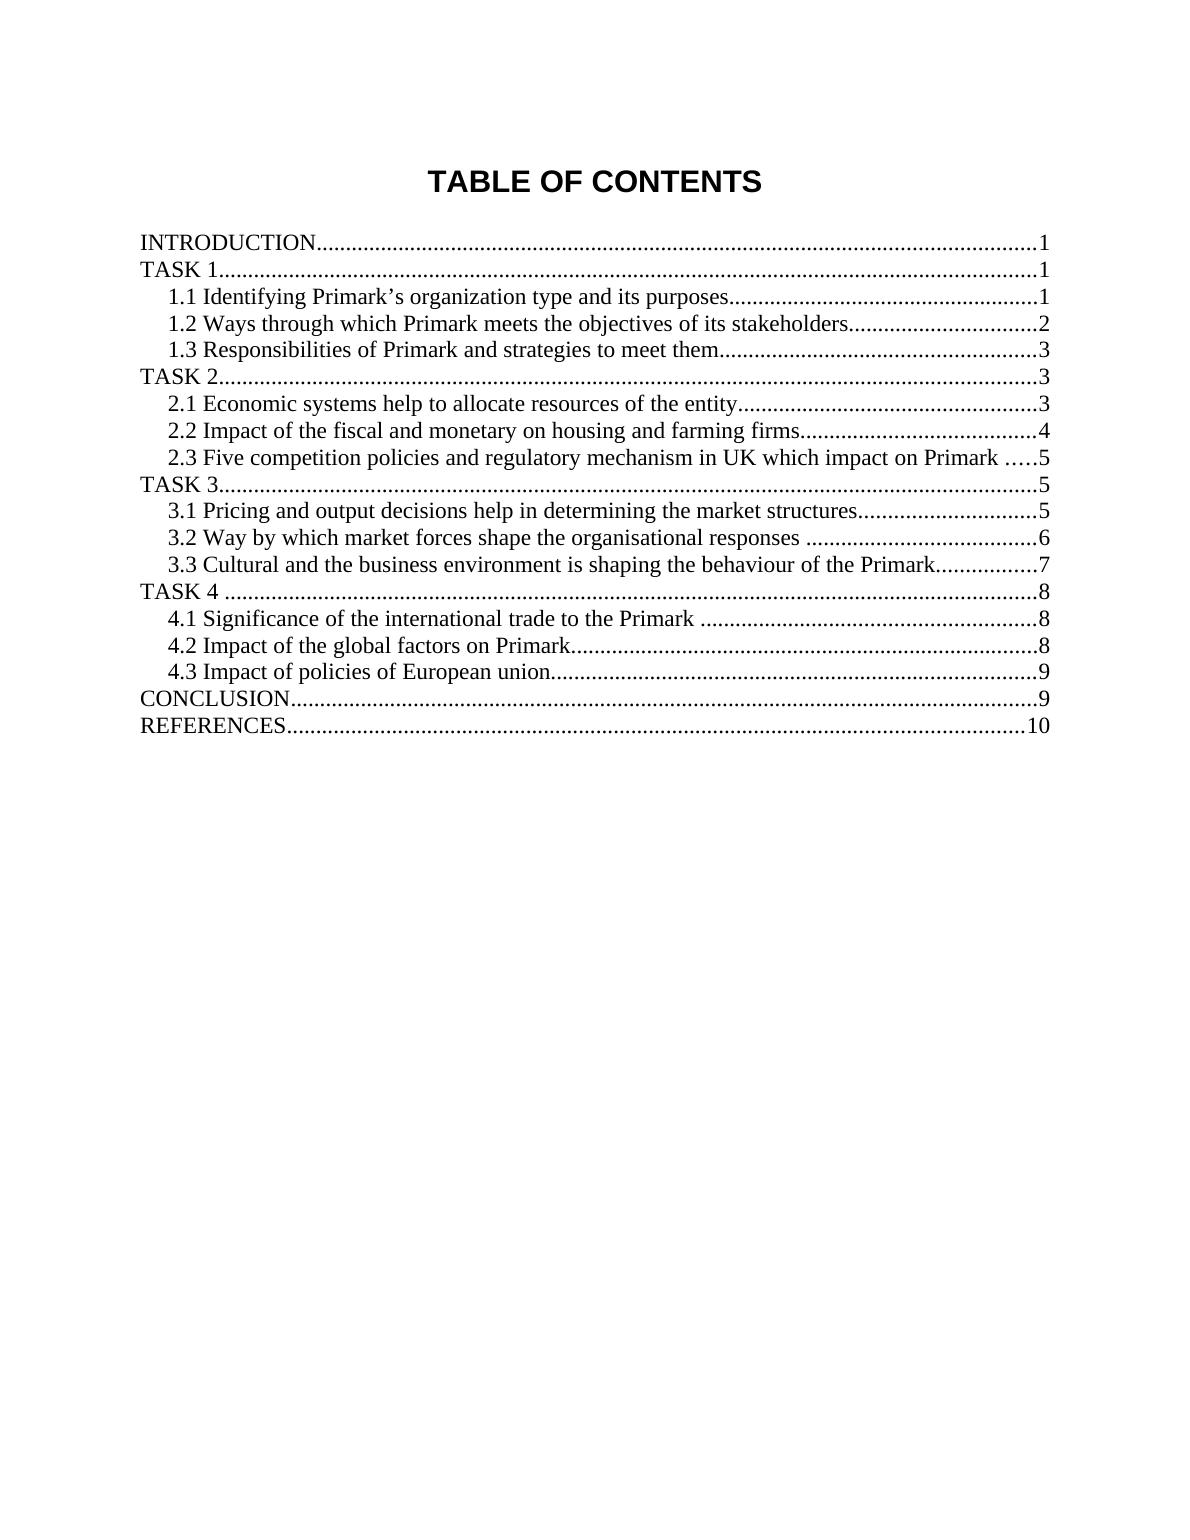 BUSINESS ENVIRONMENT TABLE OF CONTENTS_2